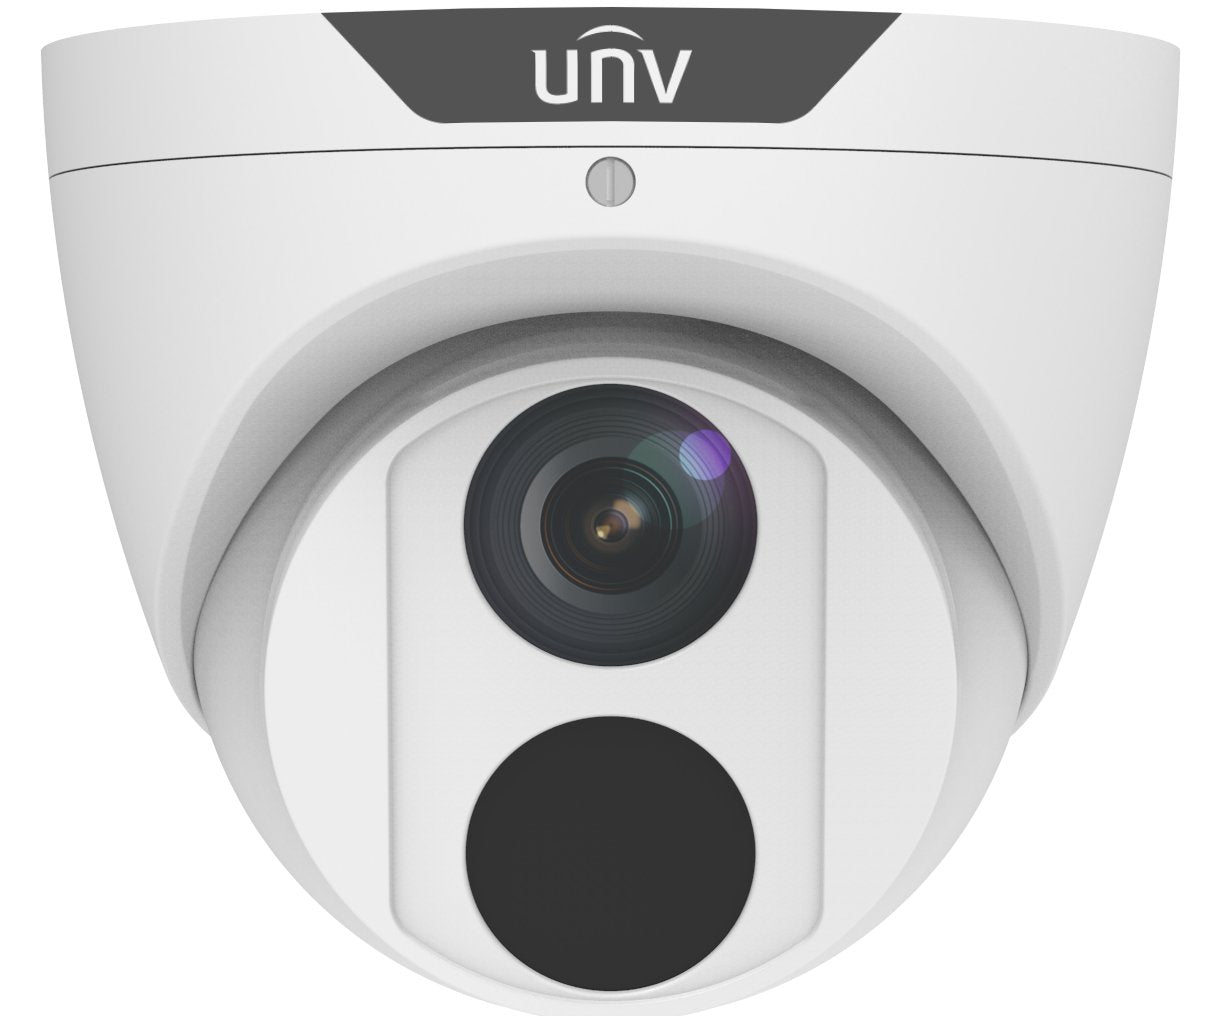 Uniview 4CH Easy Series 8MP Turret Kit - 1 x NVR301-04X-P4-2TB, 3 x IPC3618LE-ADF28K-GM | Low Light, 2.8mm, 120dB WDR, 30m IR, Built-in Mic, POE or 12VDC, IP67 (Wall Mount: TR-WM03-D-IN, Junction Box: TR-JB03-G-IN)